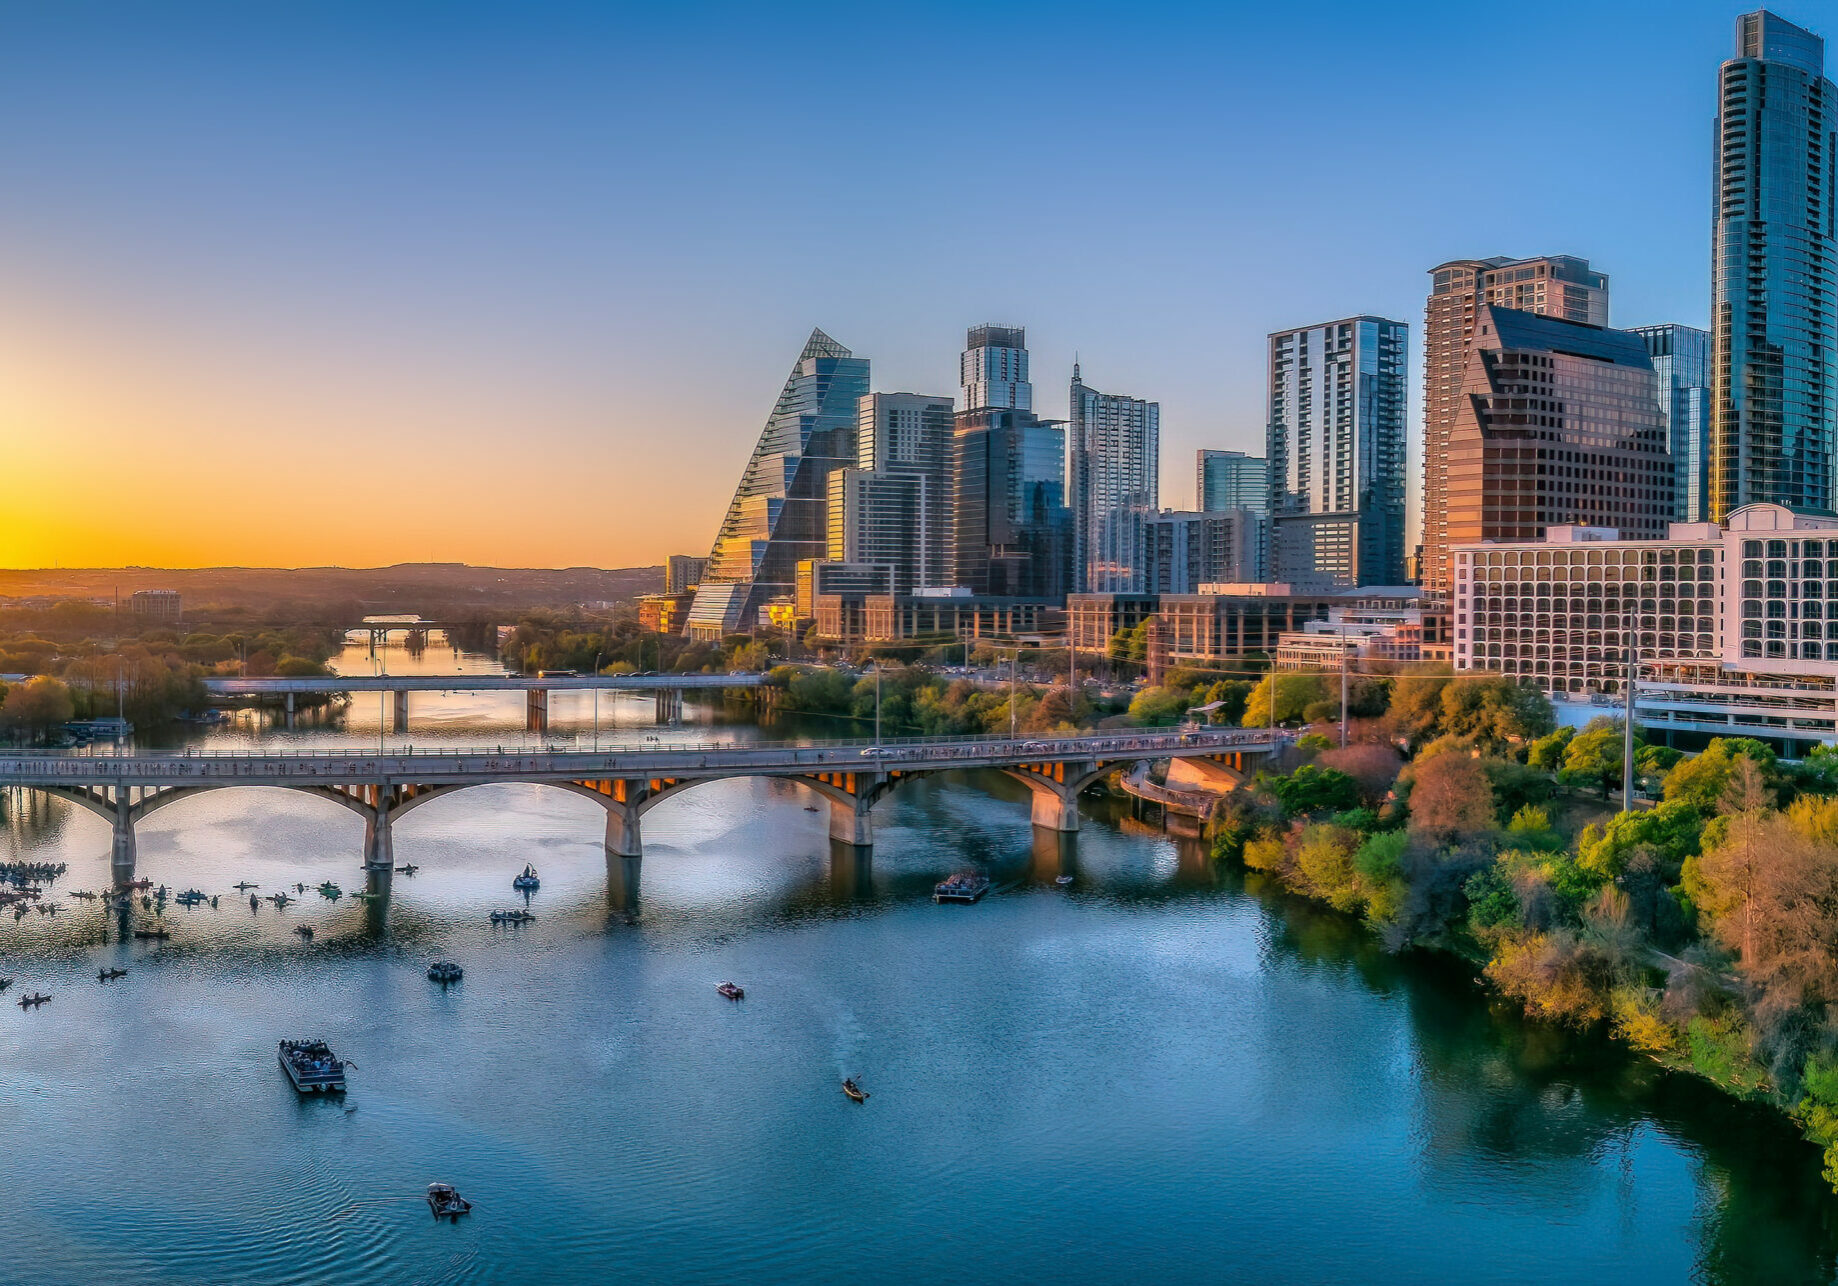 Austin, Texas- Cityscape against the sunset sky background. There are skycrapers on both sides with reflective glass walls and bridges over the Colorado river with boats.